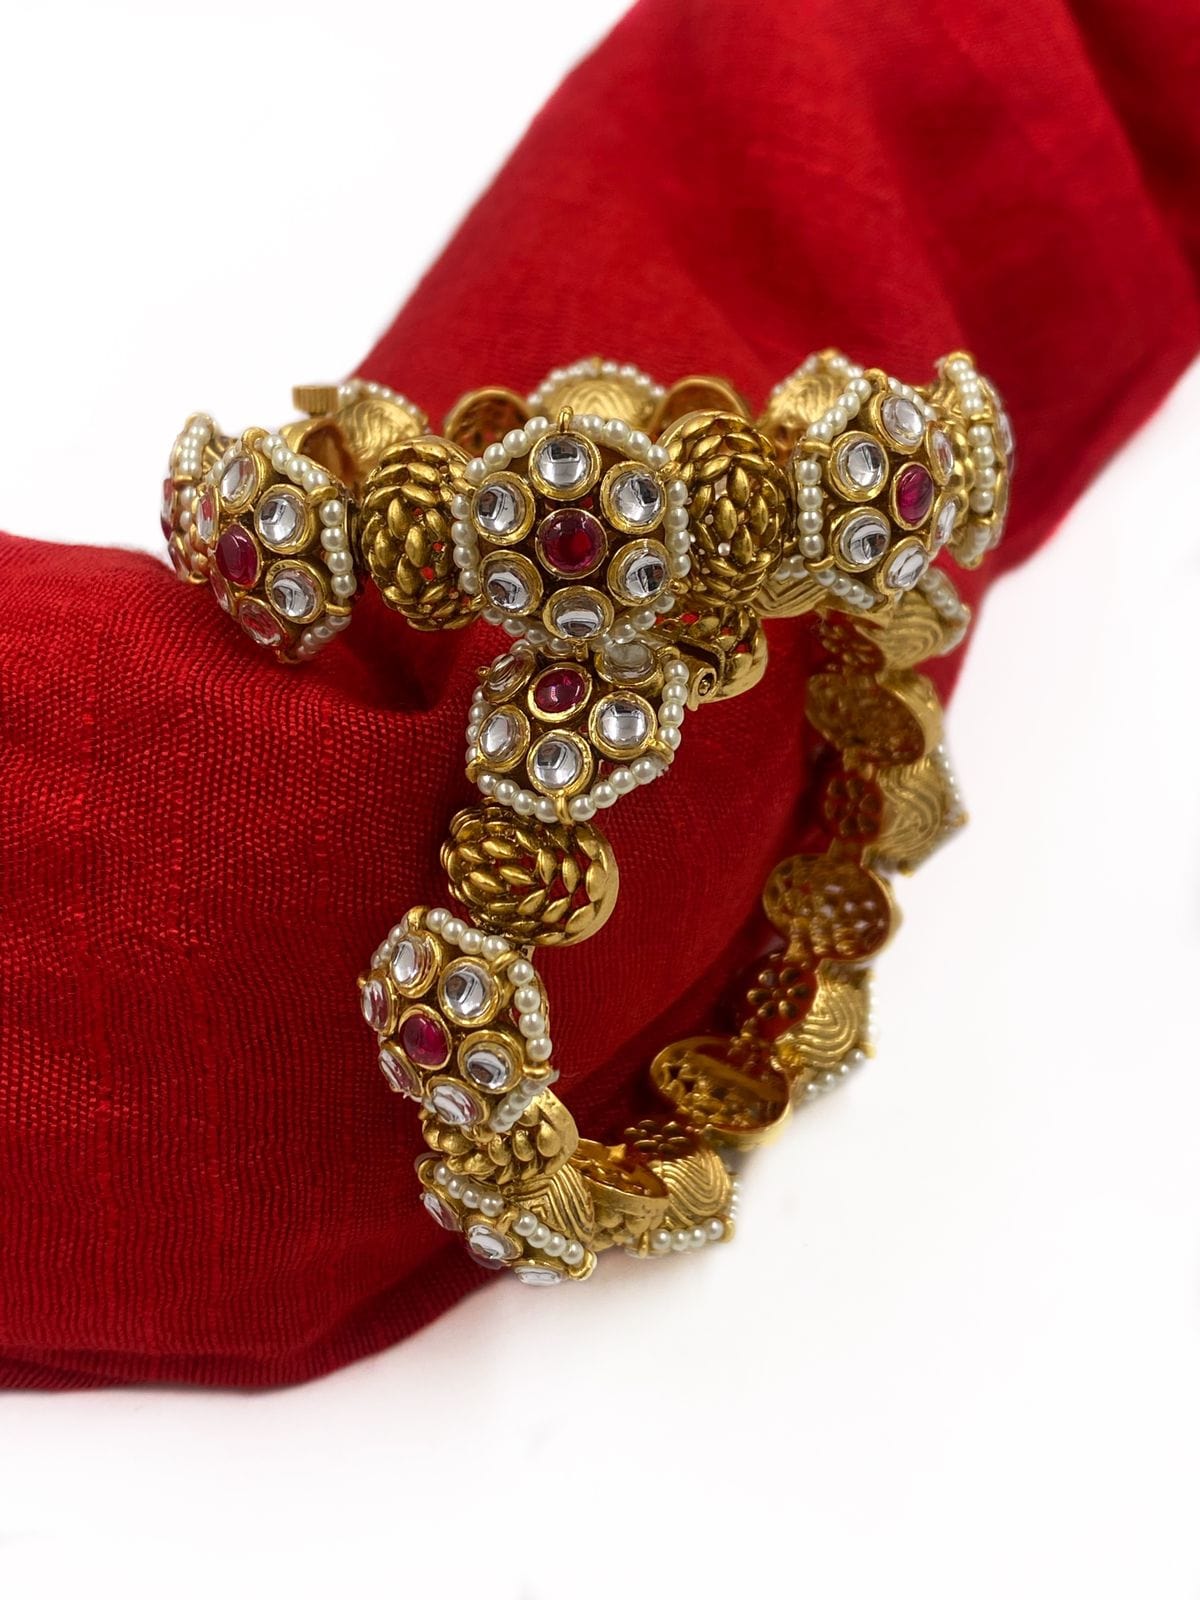 Traditional Openable Gold Plated Antique Kundan Bangles For Weddings By Gehna Shop Antique Golden Bangles